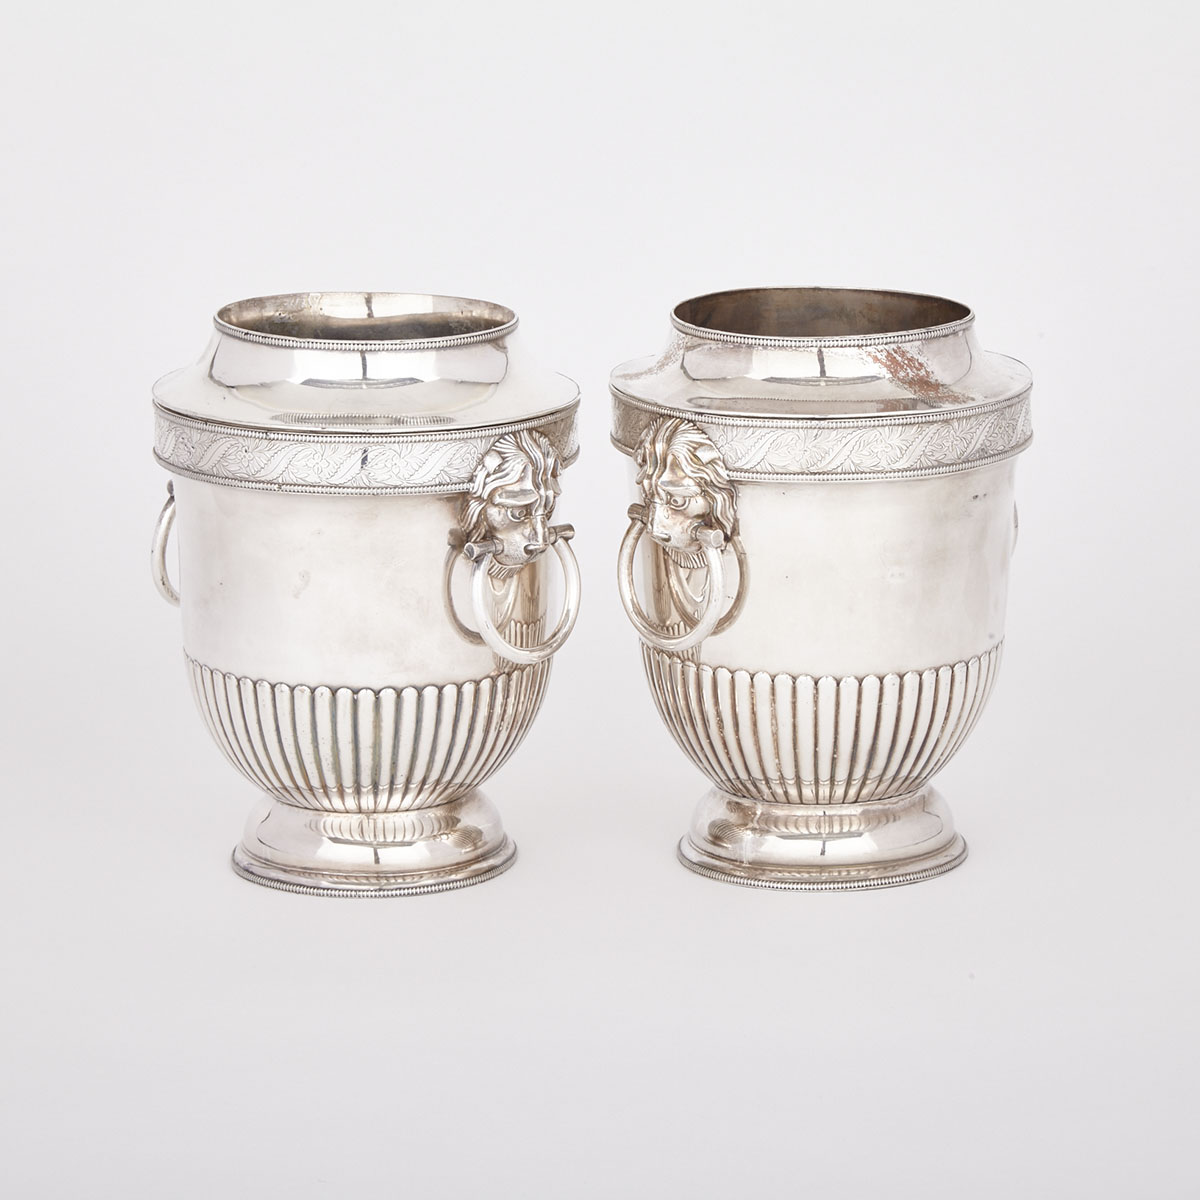 Pair of Old Sheffield Plate Wine Coolers, c.1825